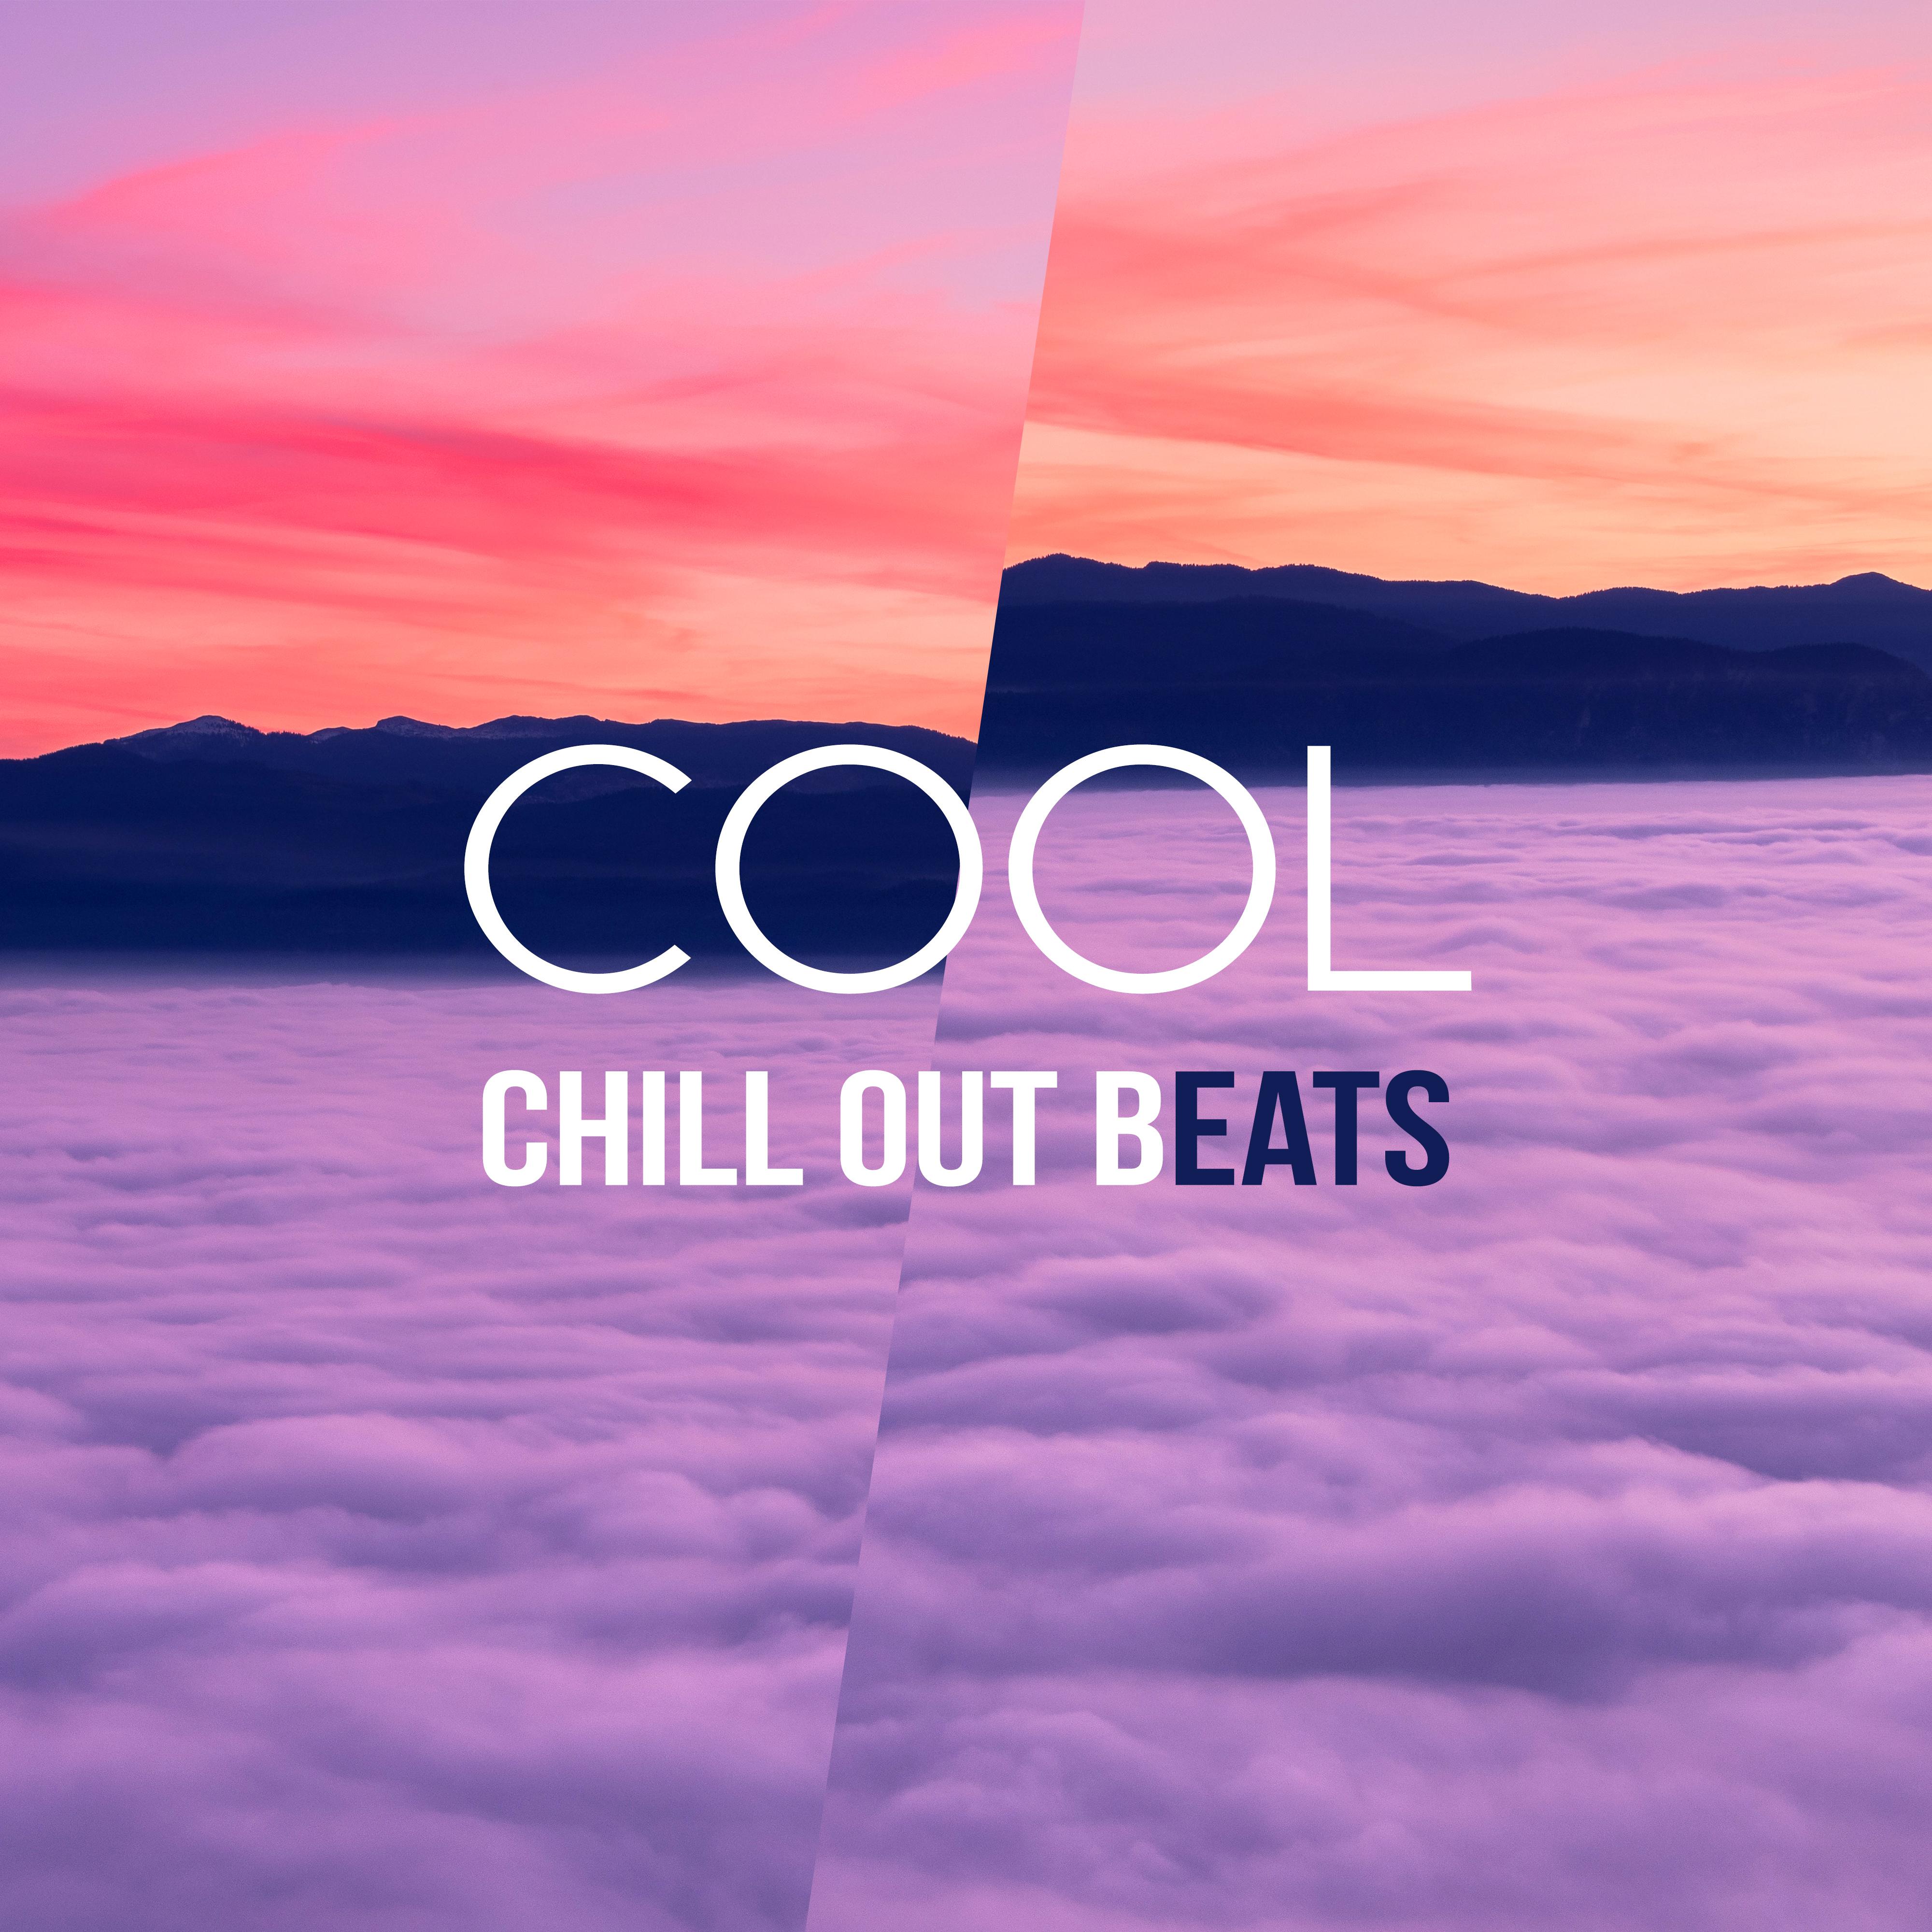 Cool Chill Out Beats  Relaxing Chill Out Music, New Chill Out Vibrations, Relax  Dance